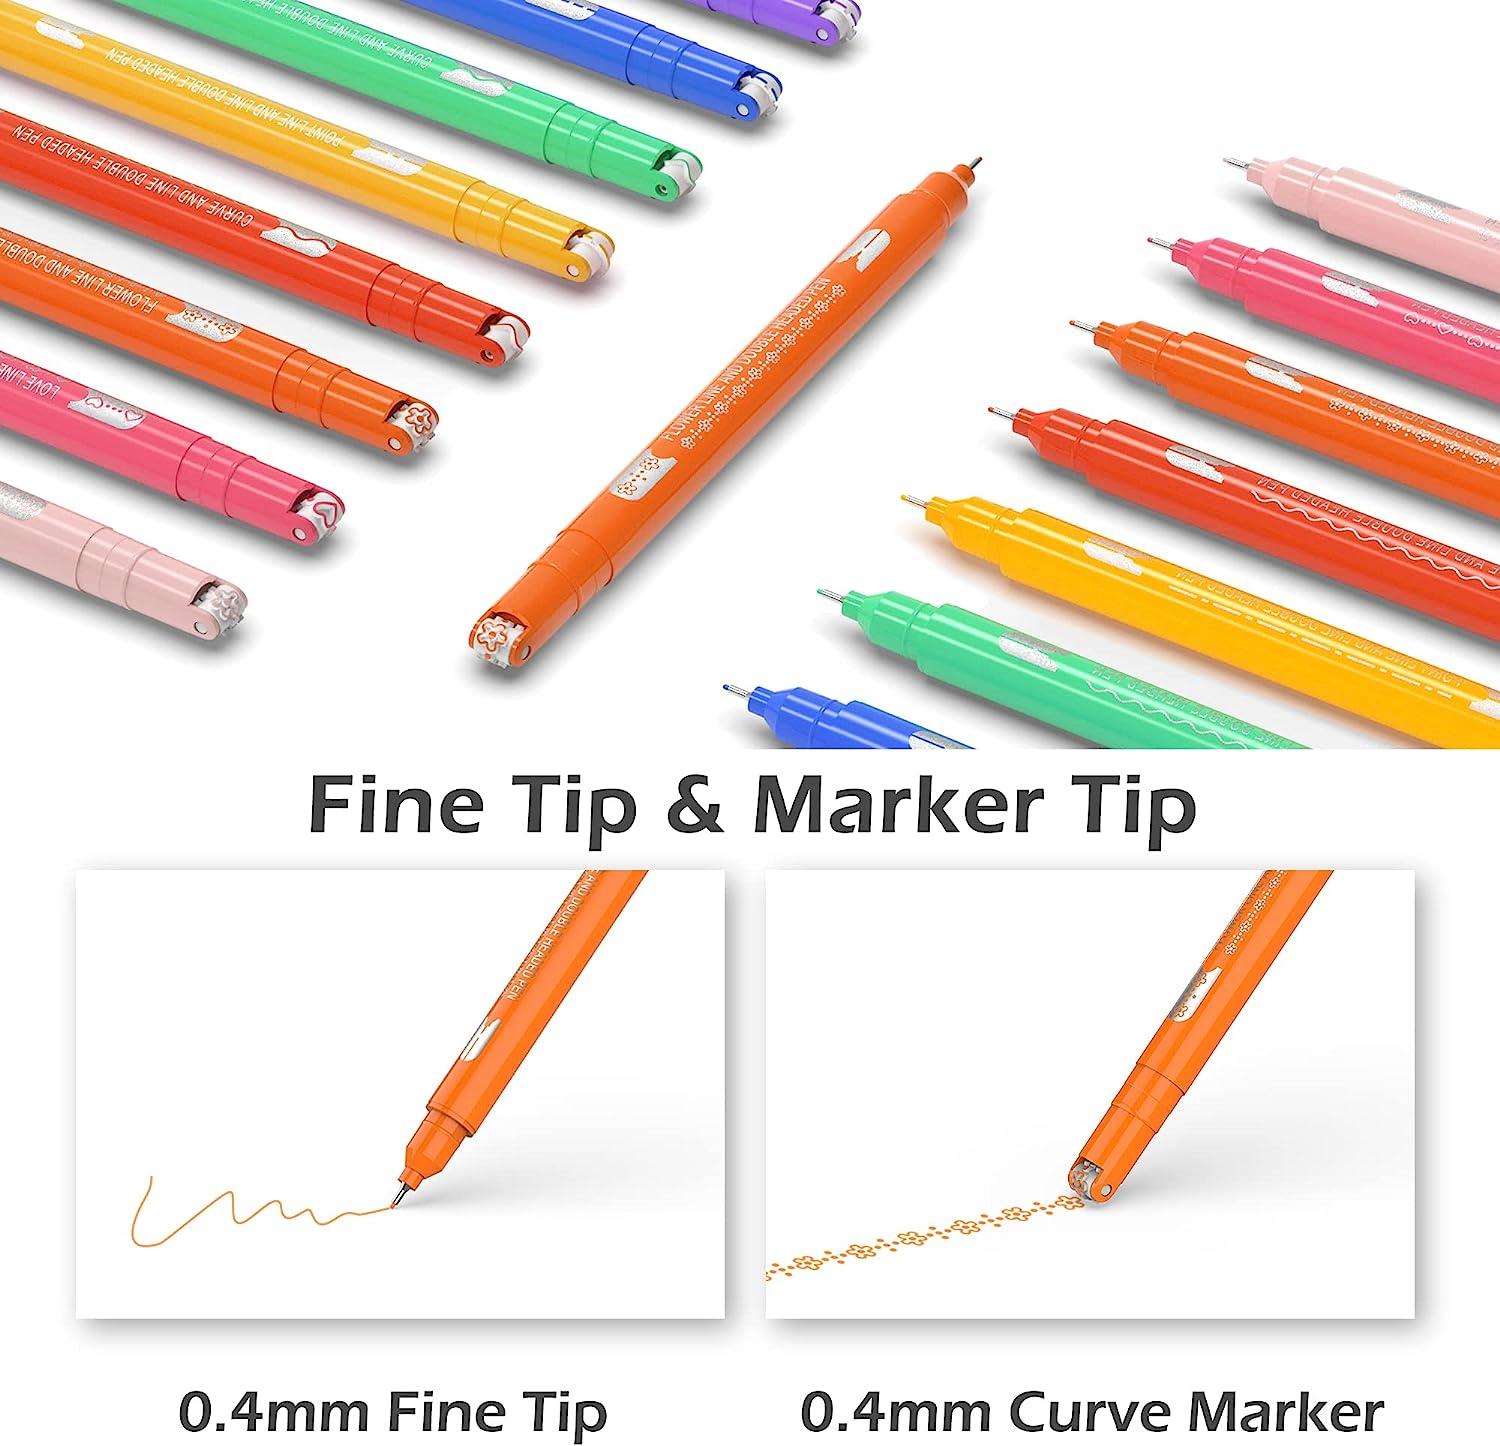  Metallic Colors Journal Planner Pens Colorful 0.5mm Markers  Fine Tip Drawing Pen Porous Fineliner Pen for Bullet Journaling Writing  Note Taking Coloring Art Office School Supplies (6 metallic colors) 